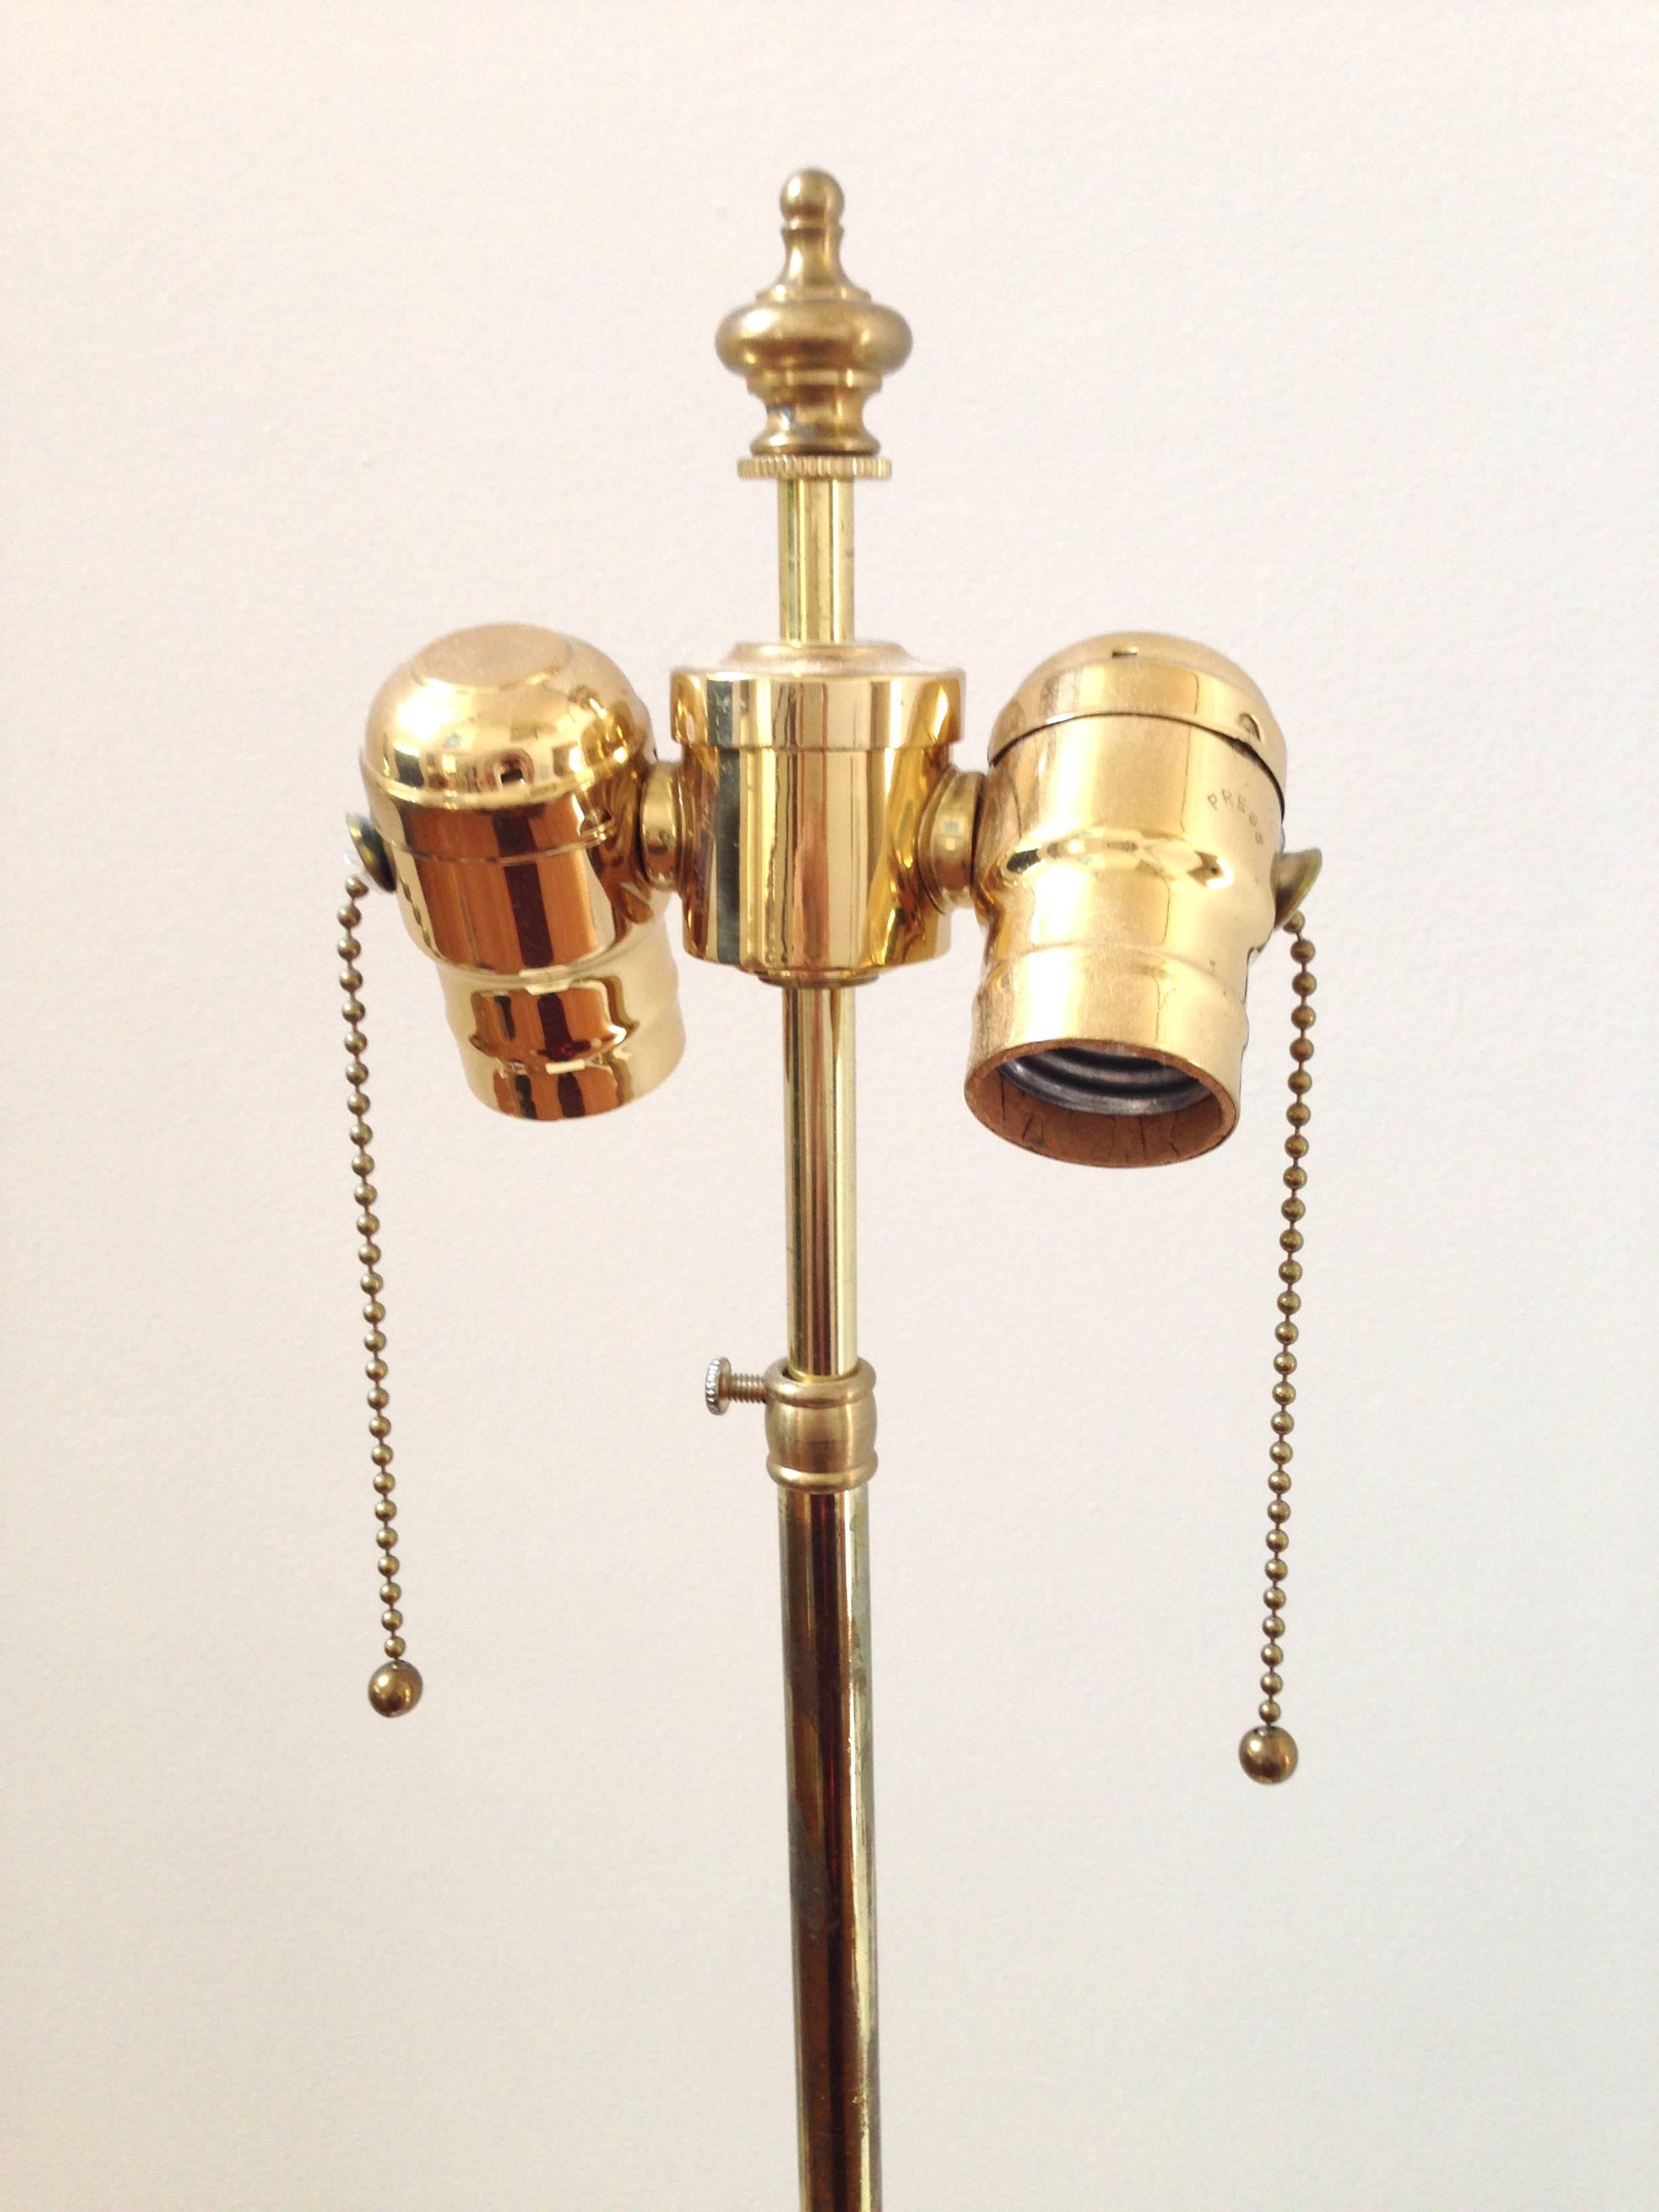 Pair of Giacometti Style Lamps In Good Condition For Sale In Ashburn, VA